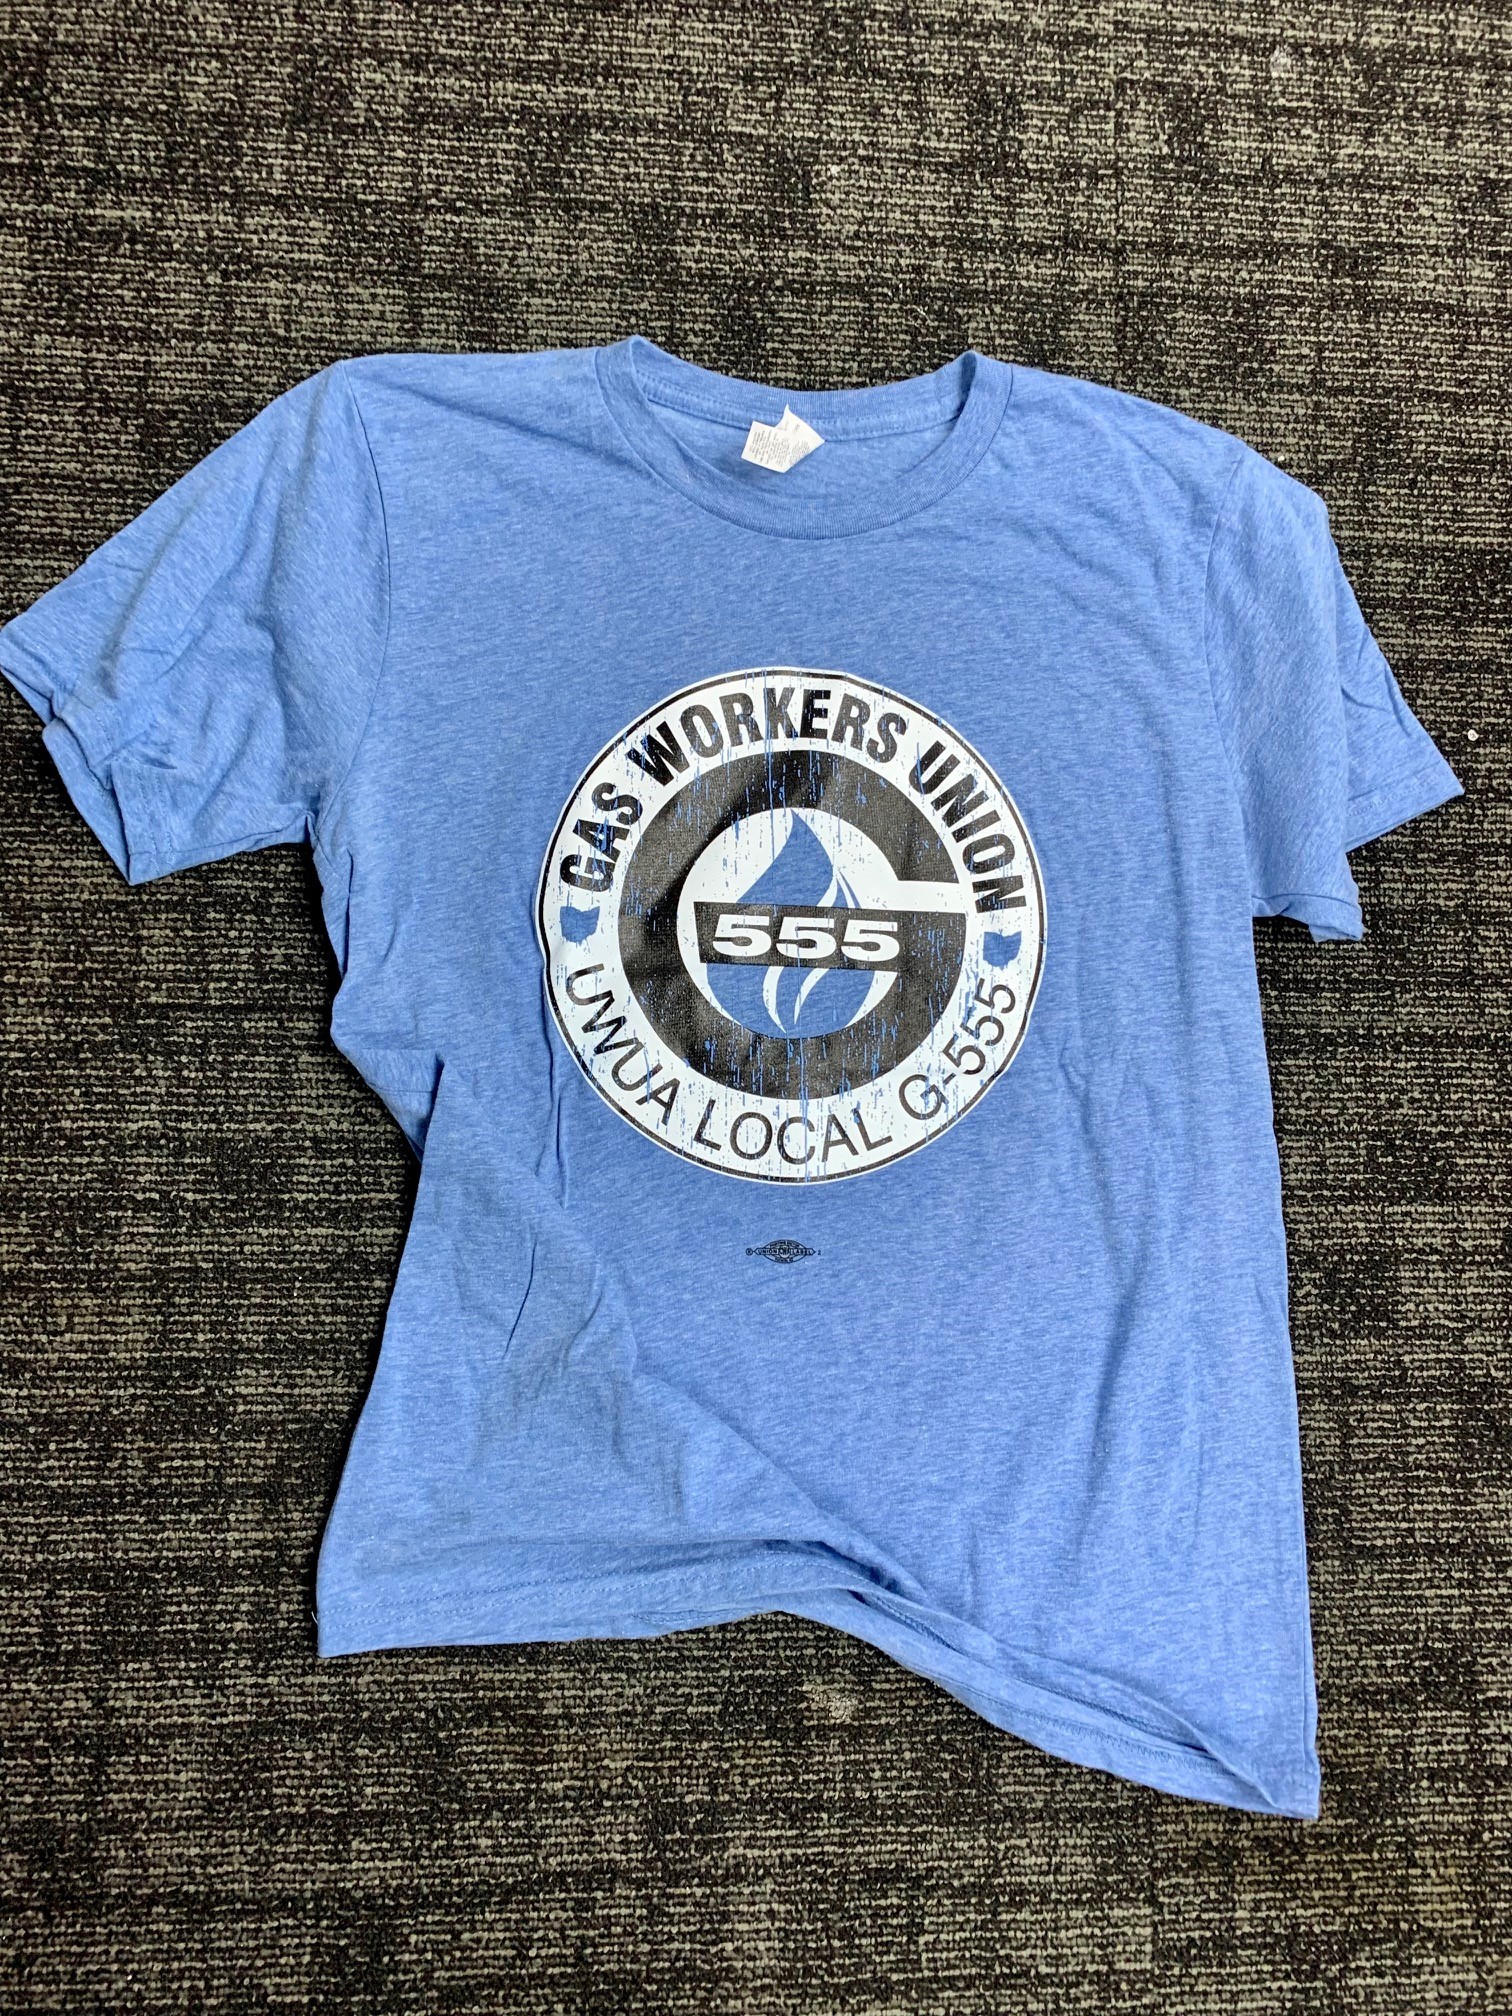 Seminary fælde Installere T-Shirt – G-555 Logo – Light Blue – Small | Gas Workers Union Local G-555